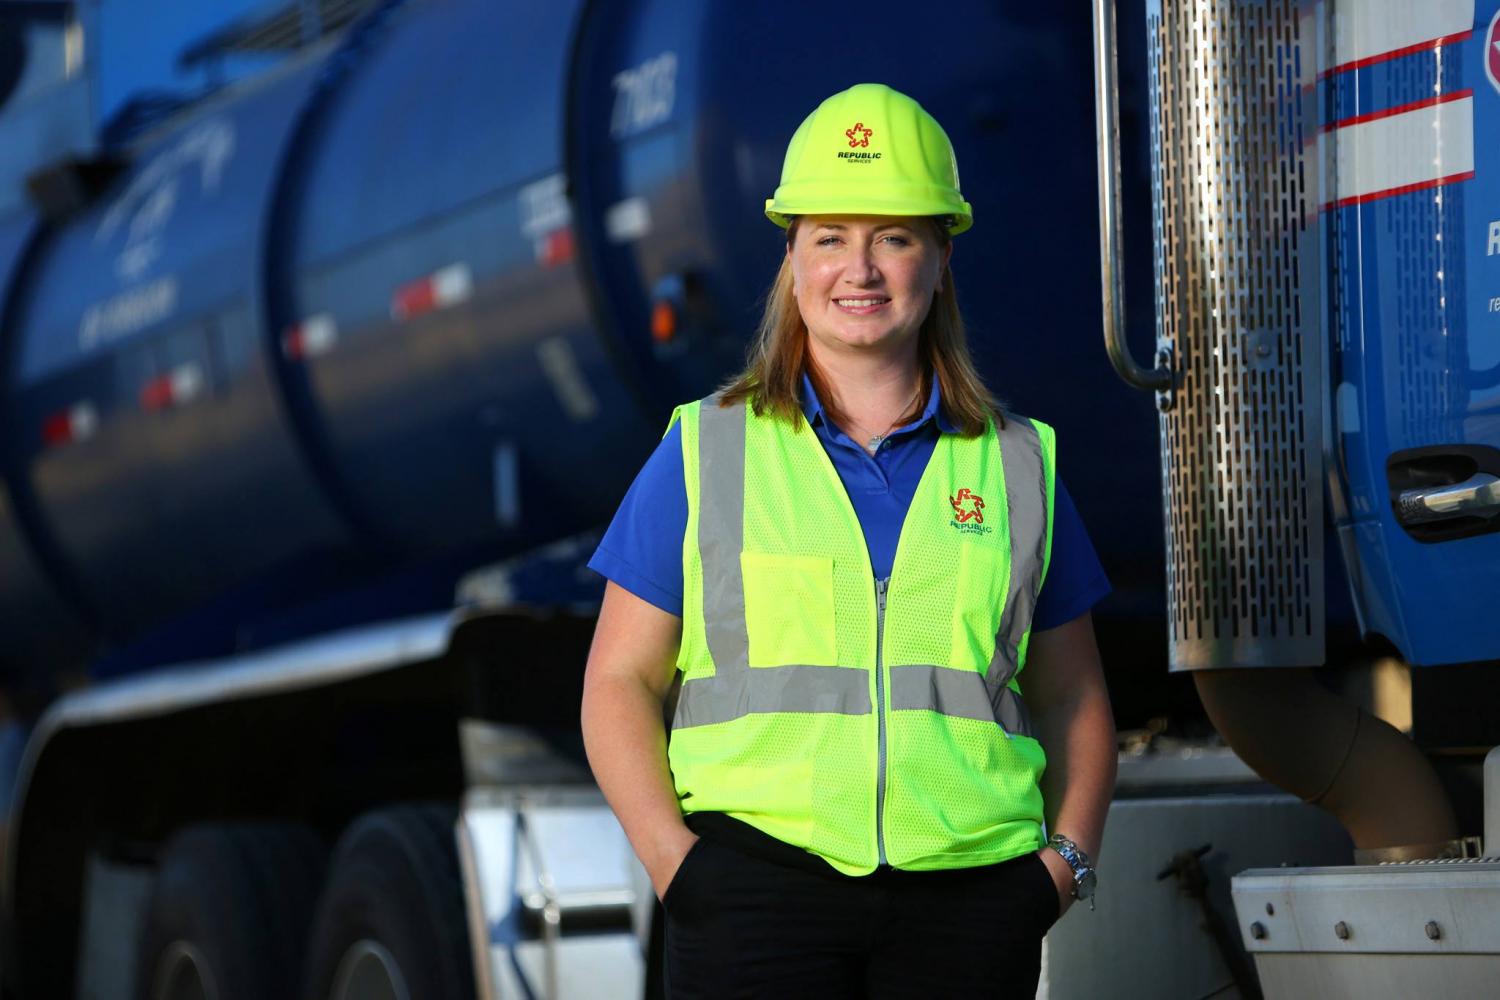 When it comes to hiring women in non-traditional fields, the global recycling and hazardous waste company Republic Services has made its mark. 